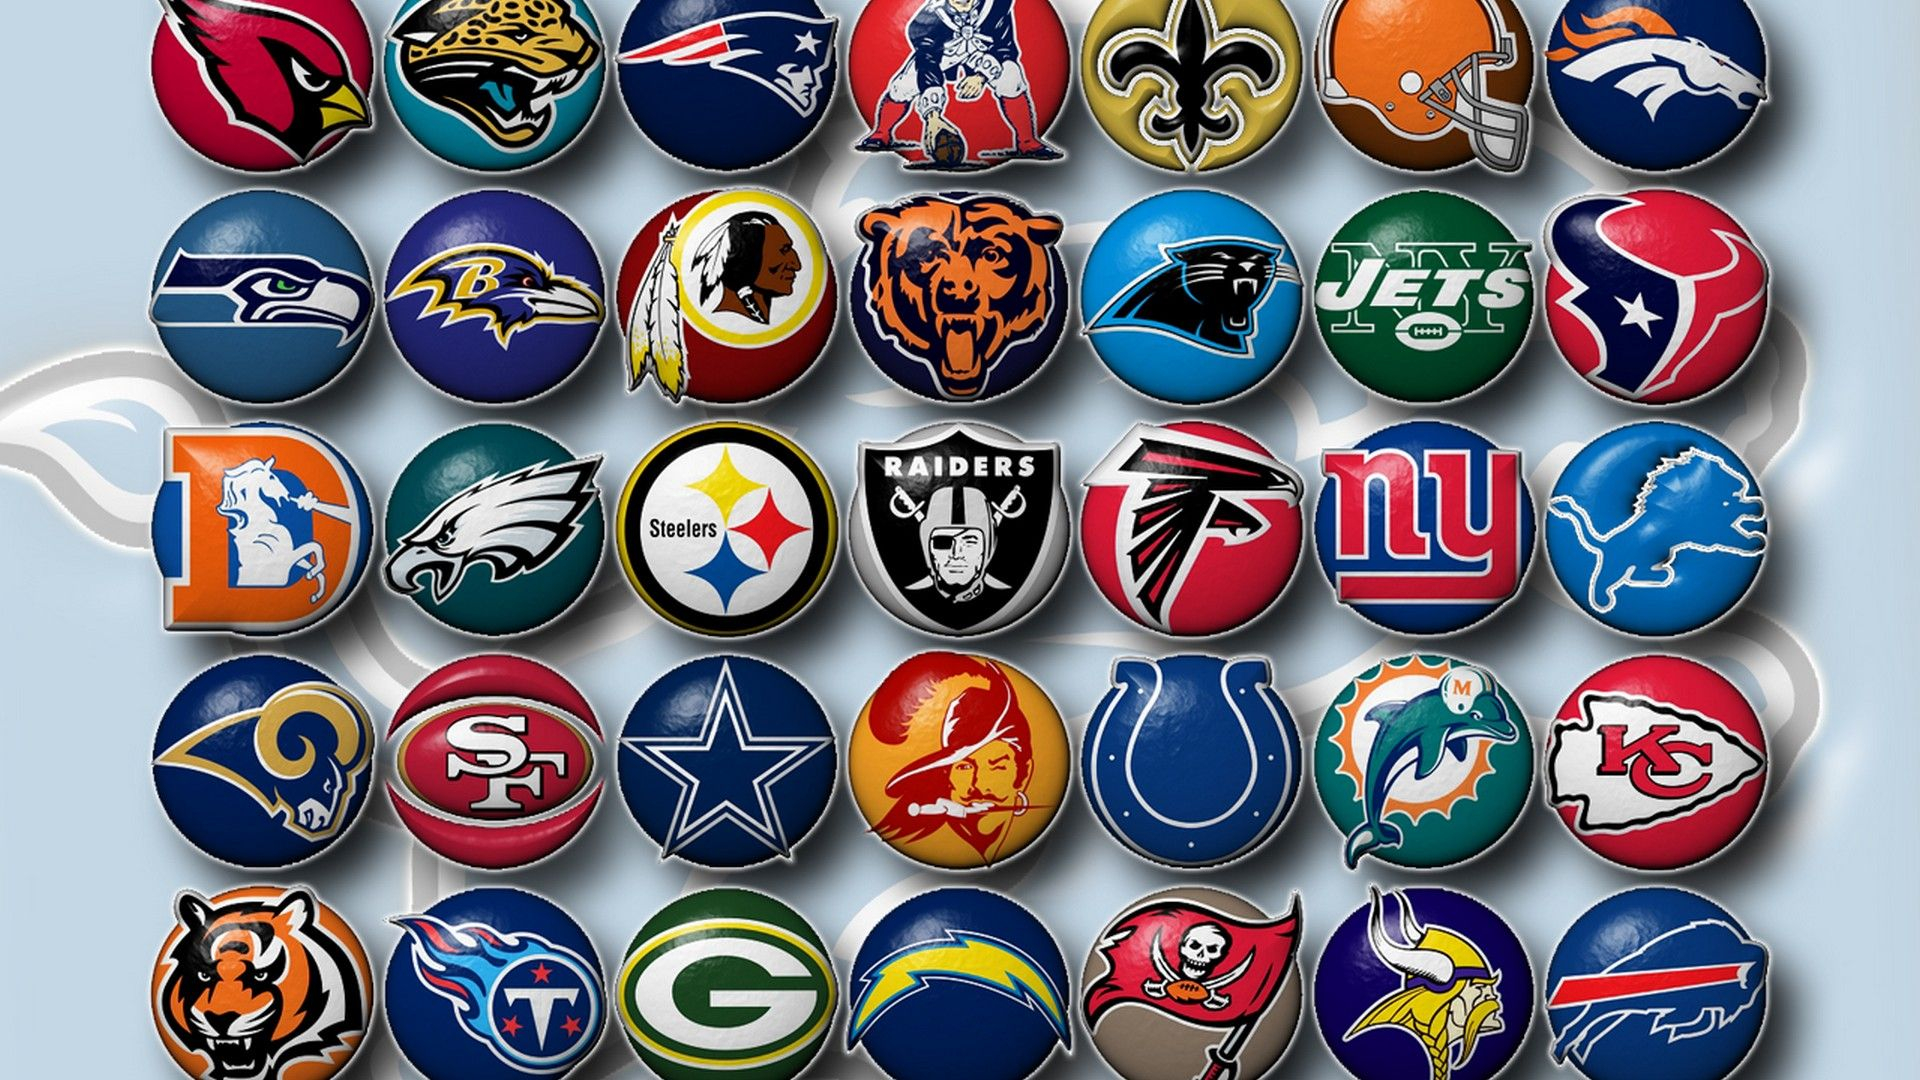 1920x1080 NFL For PC Wallpaper 2022 NFL Football Wallpapers | Nfl football teams, Nfl teams logos, Nfl uniforms